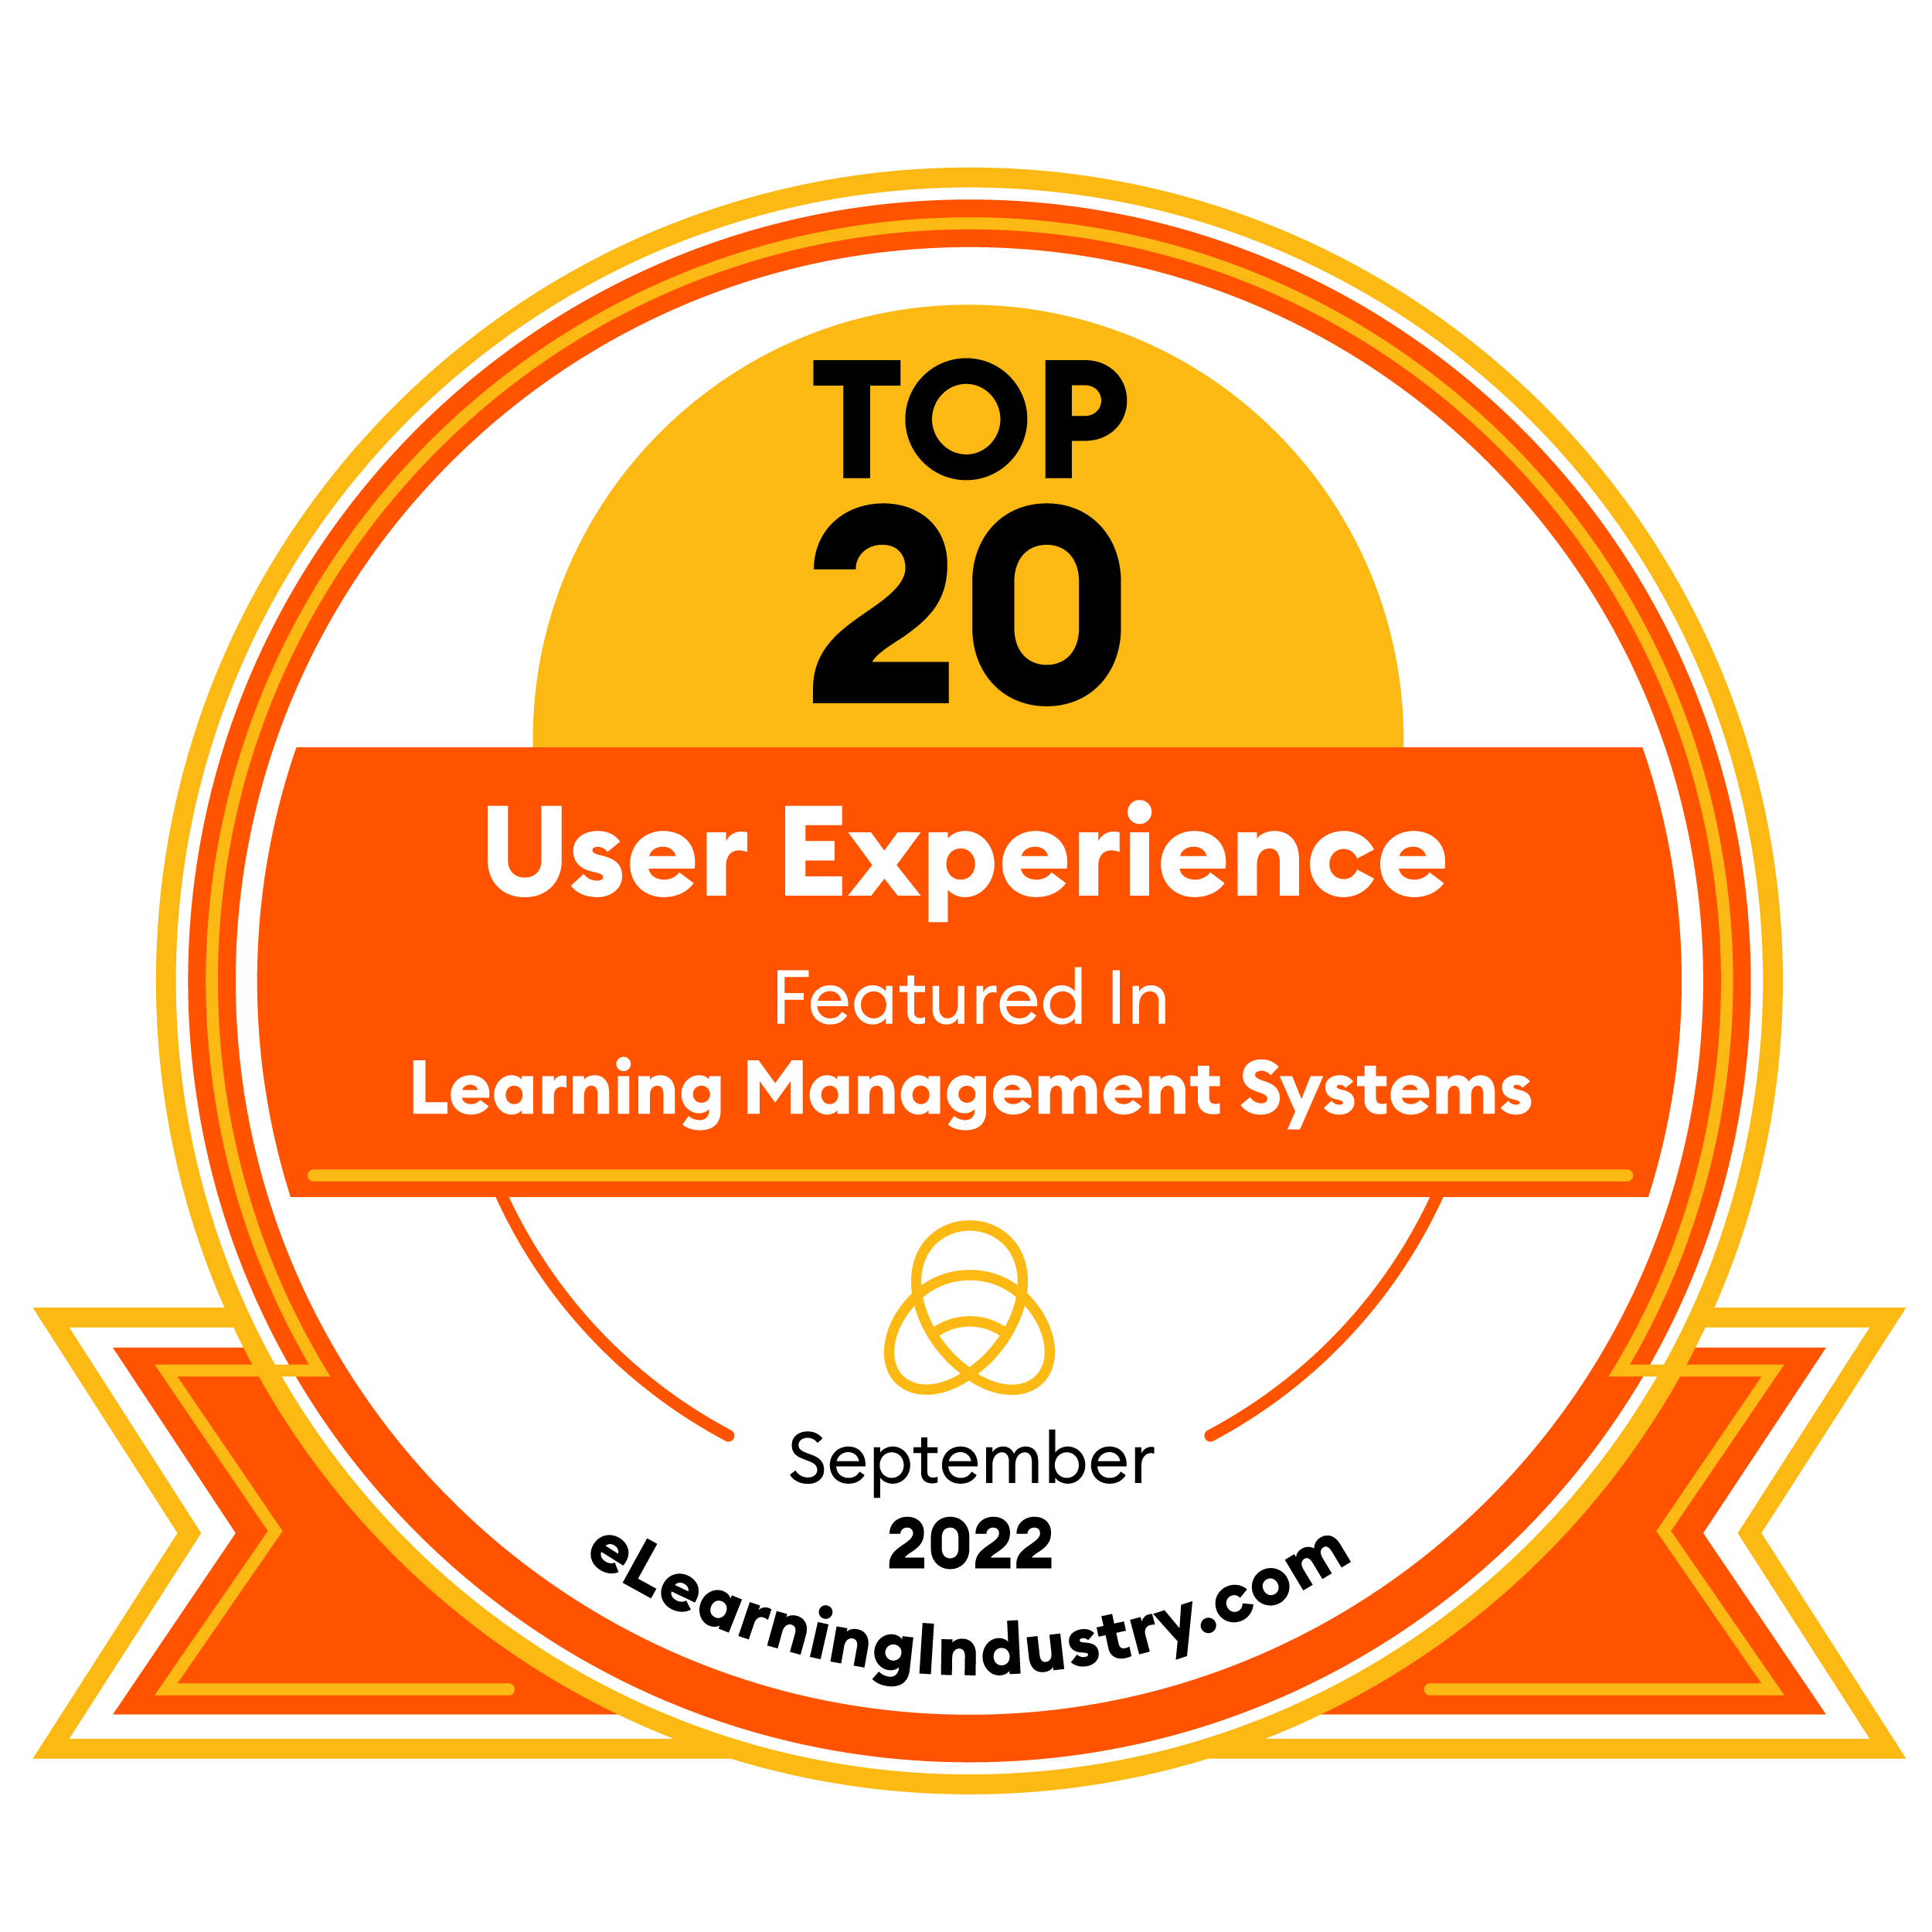 eLearning Industry ranked GyrusAim as #6 in Top 20 LMS for User Experience- 2022